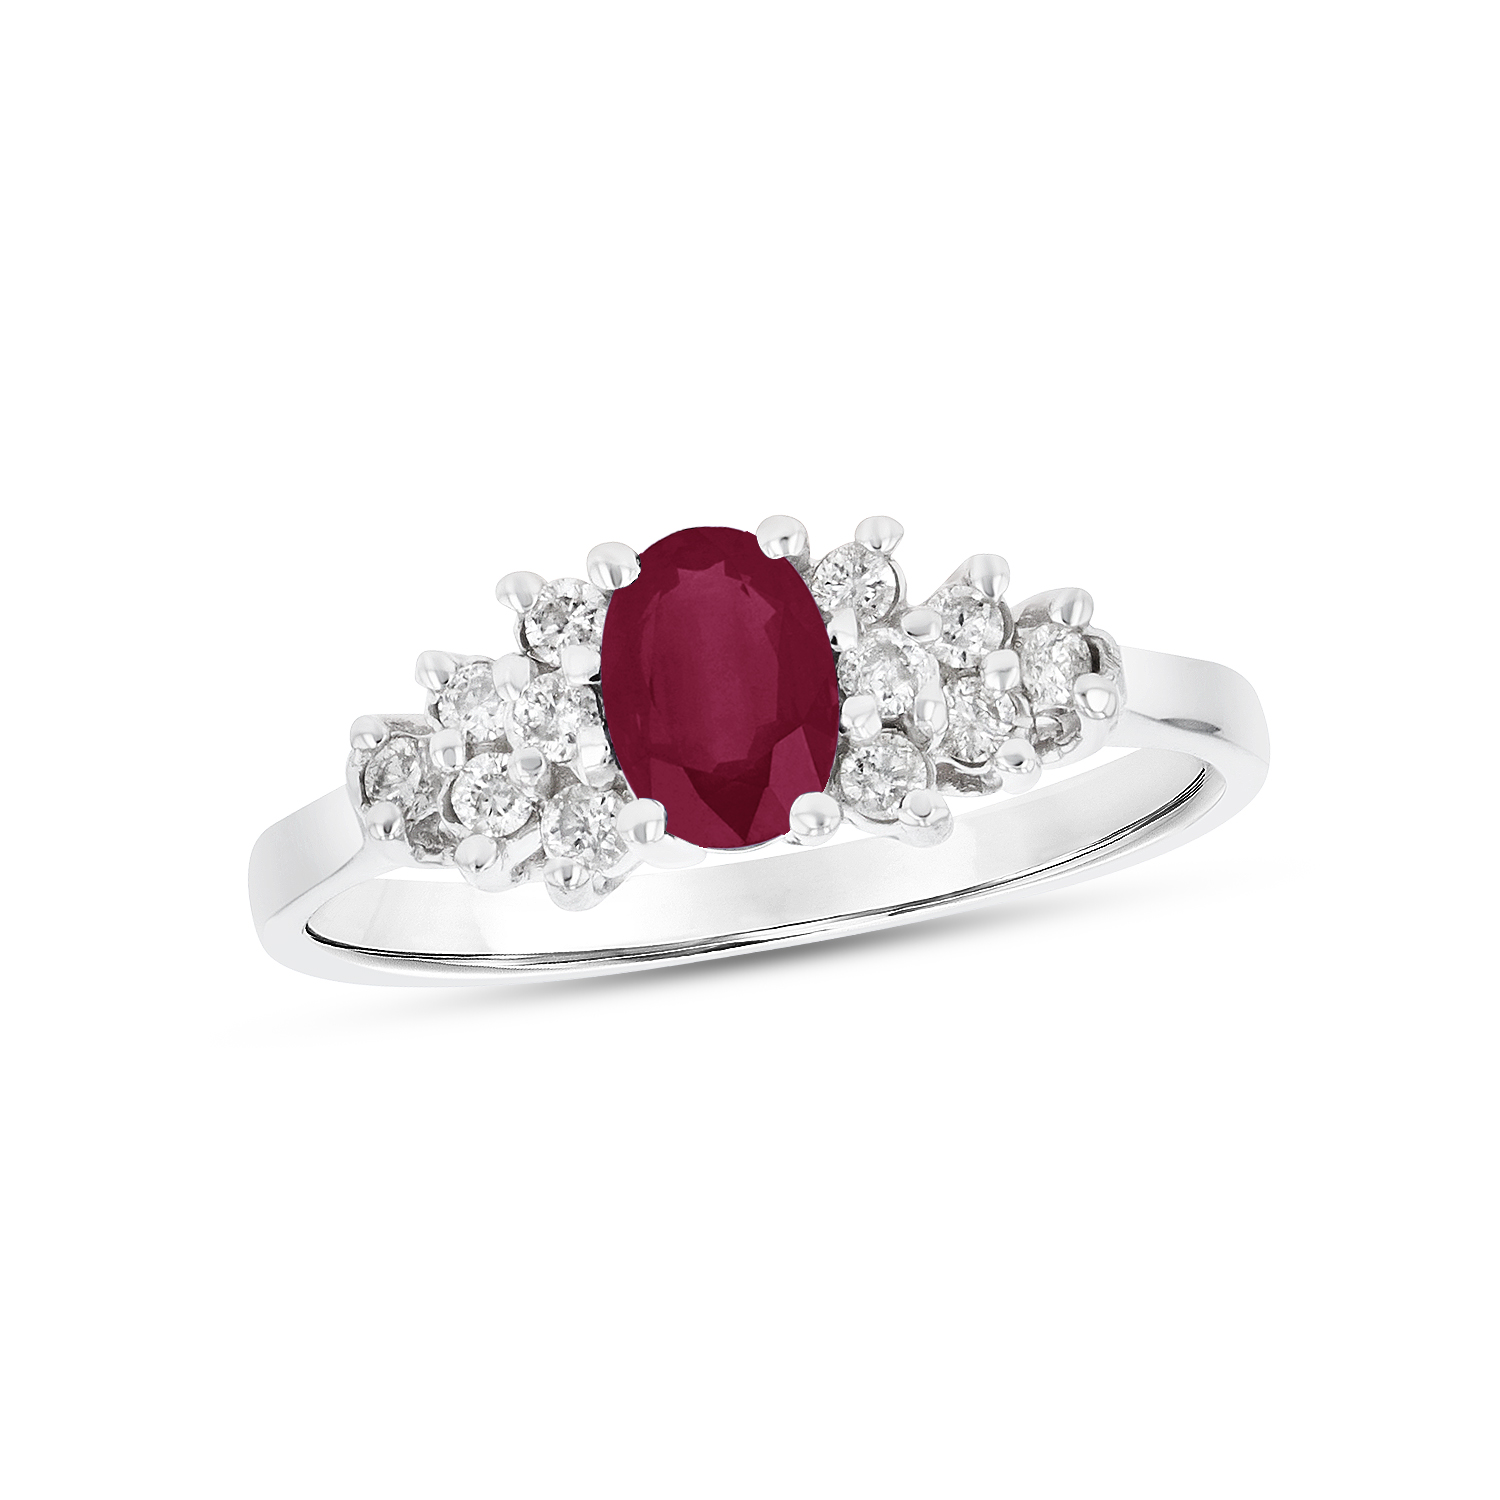 View 0.63ctw Diamond and Ruby Ring in 14k White Gold